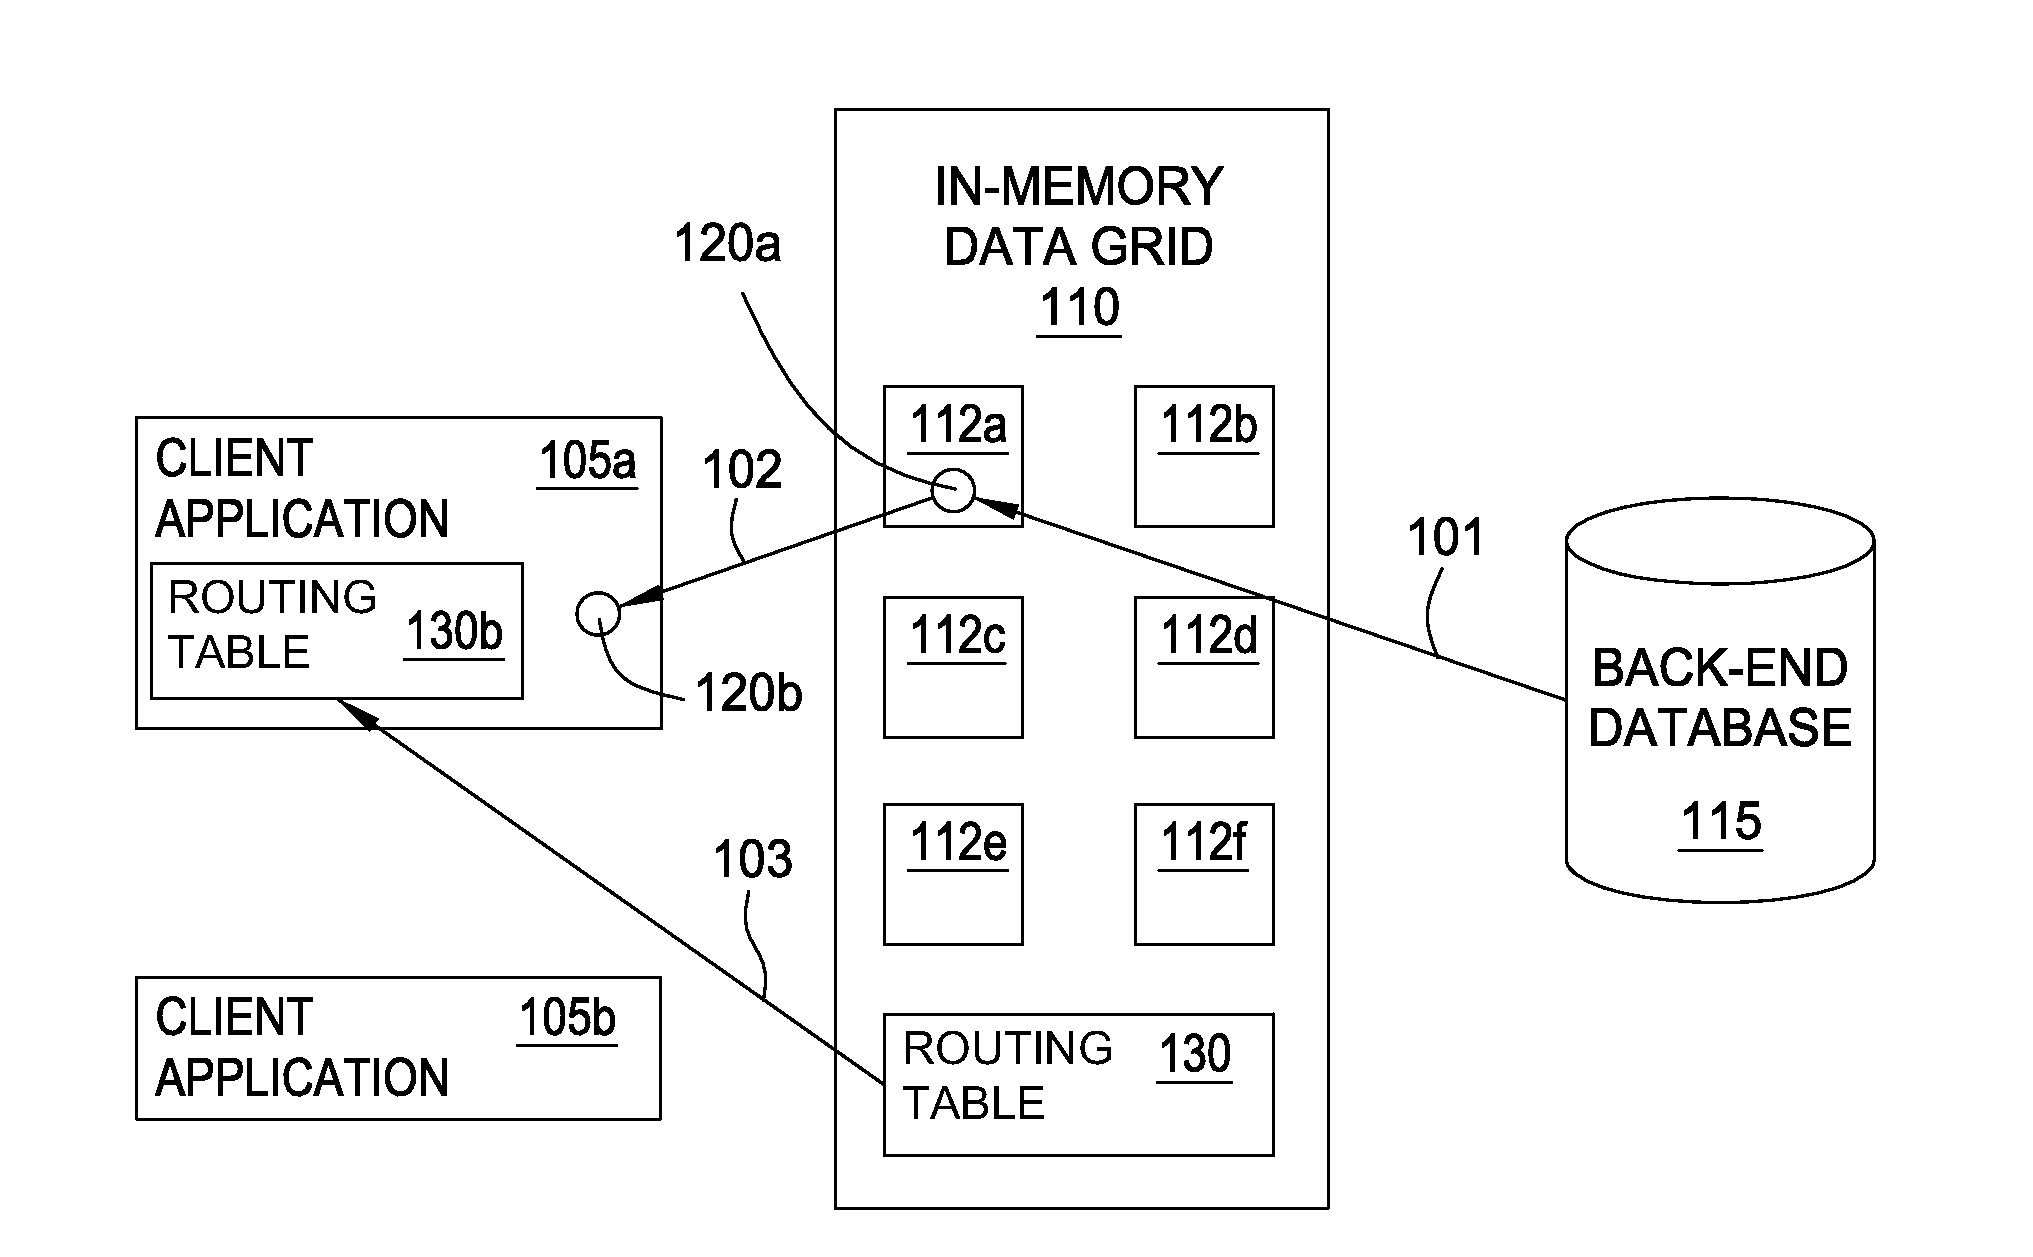 Proximity grids for an in-memory data grid